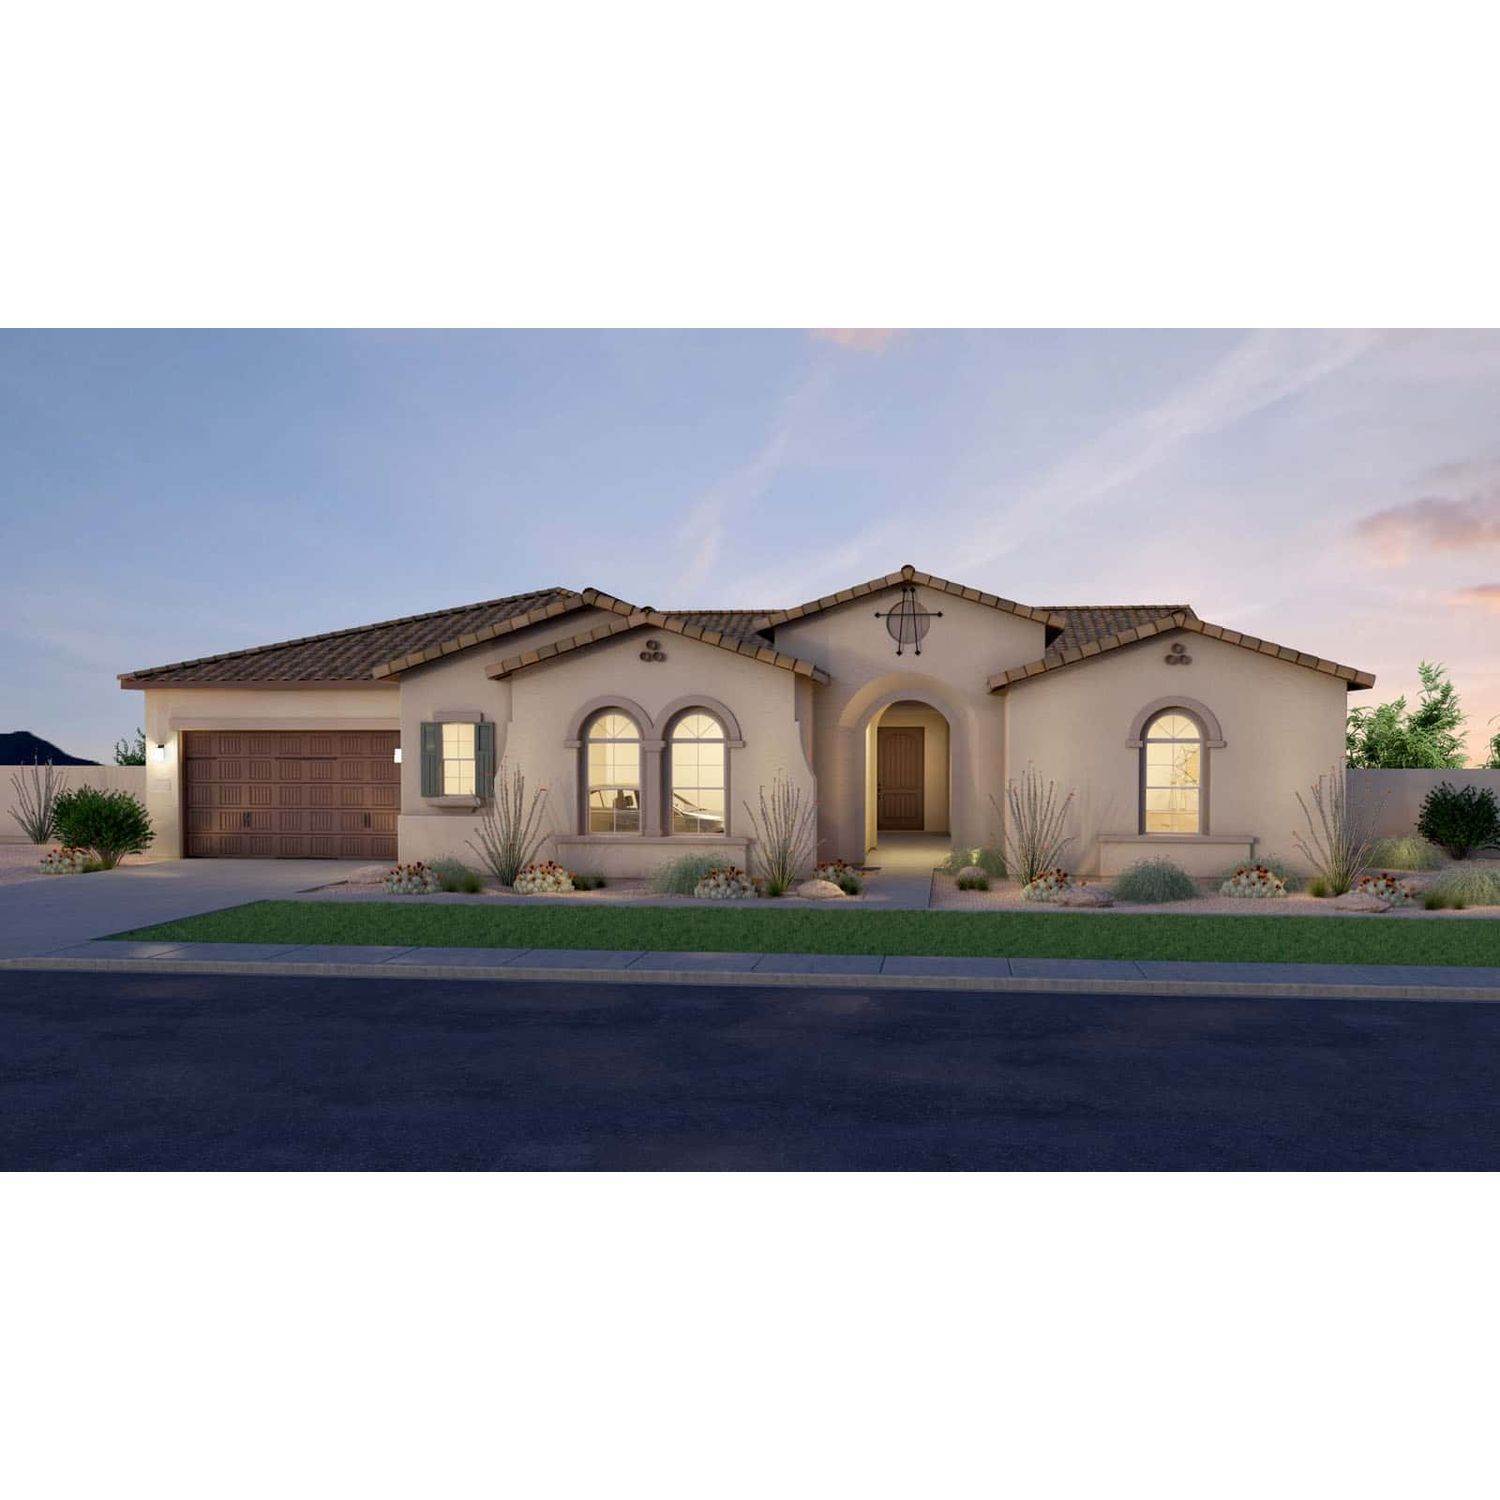 5. Single Family for Sale at Preserve At Sedella 18102 W Highland Ave., Goodyear, AZ 85395